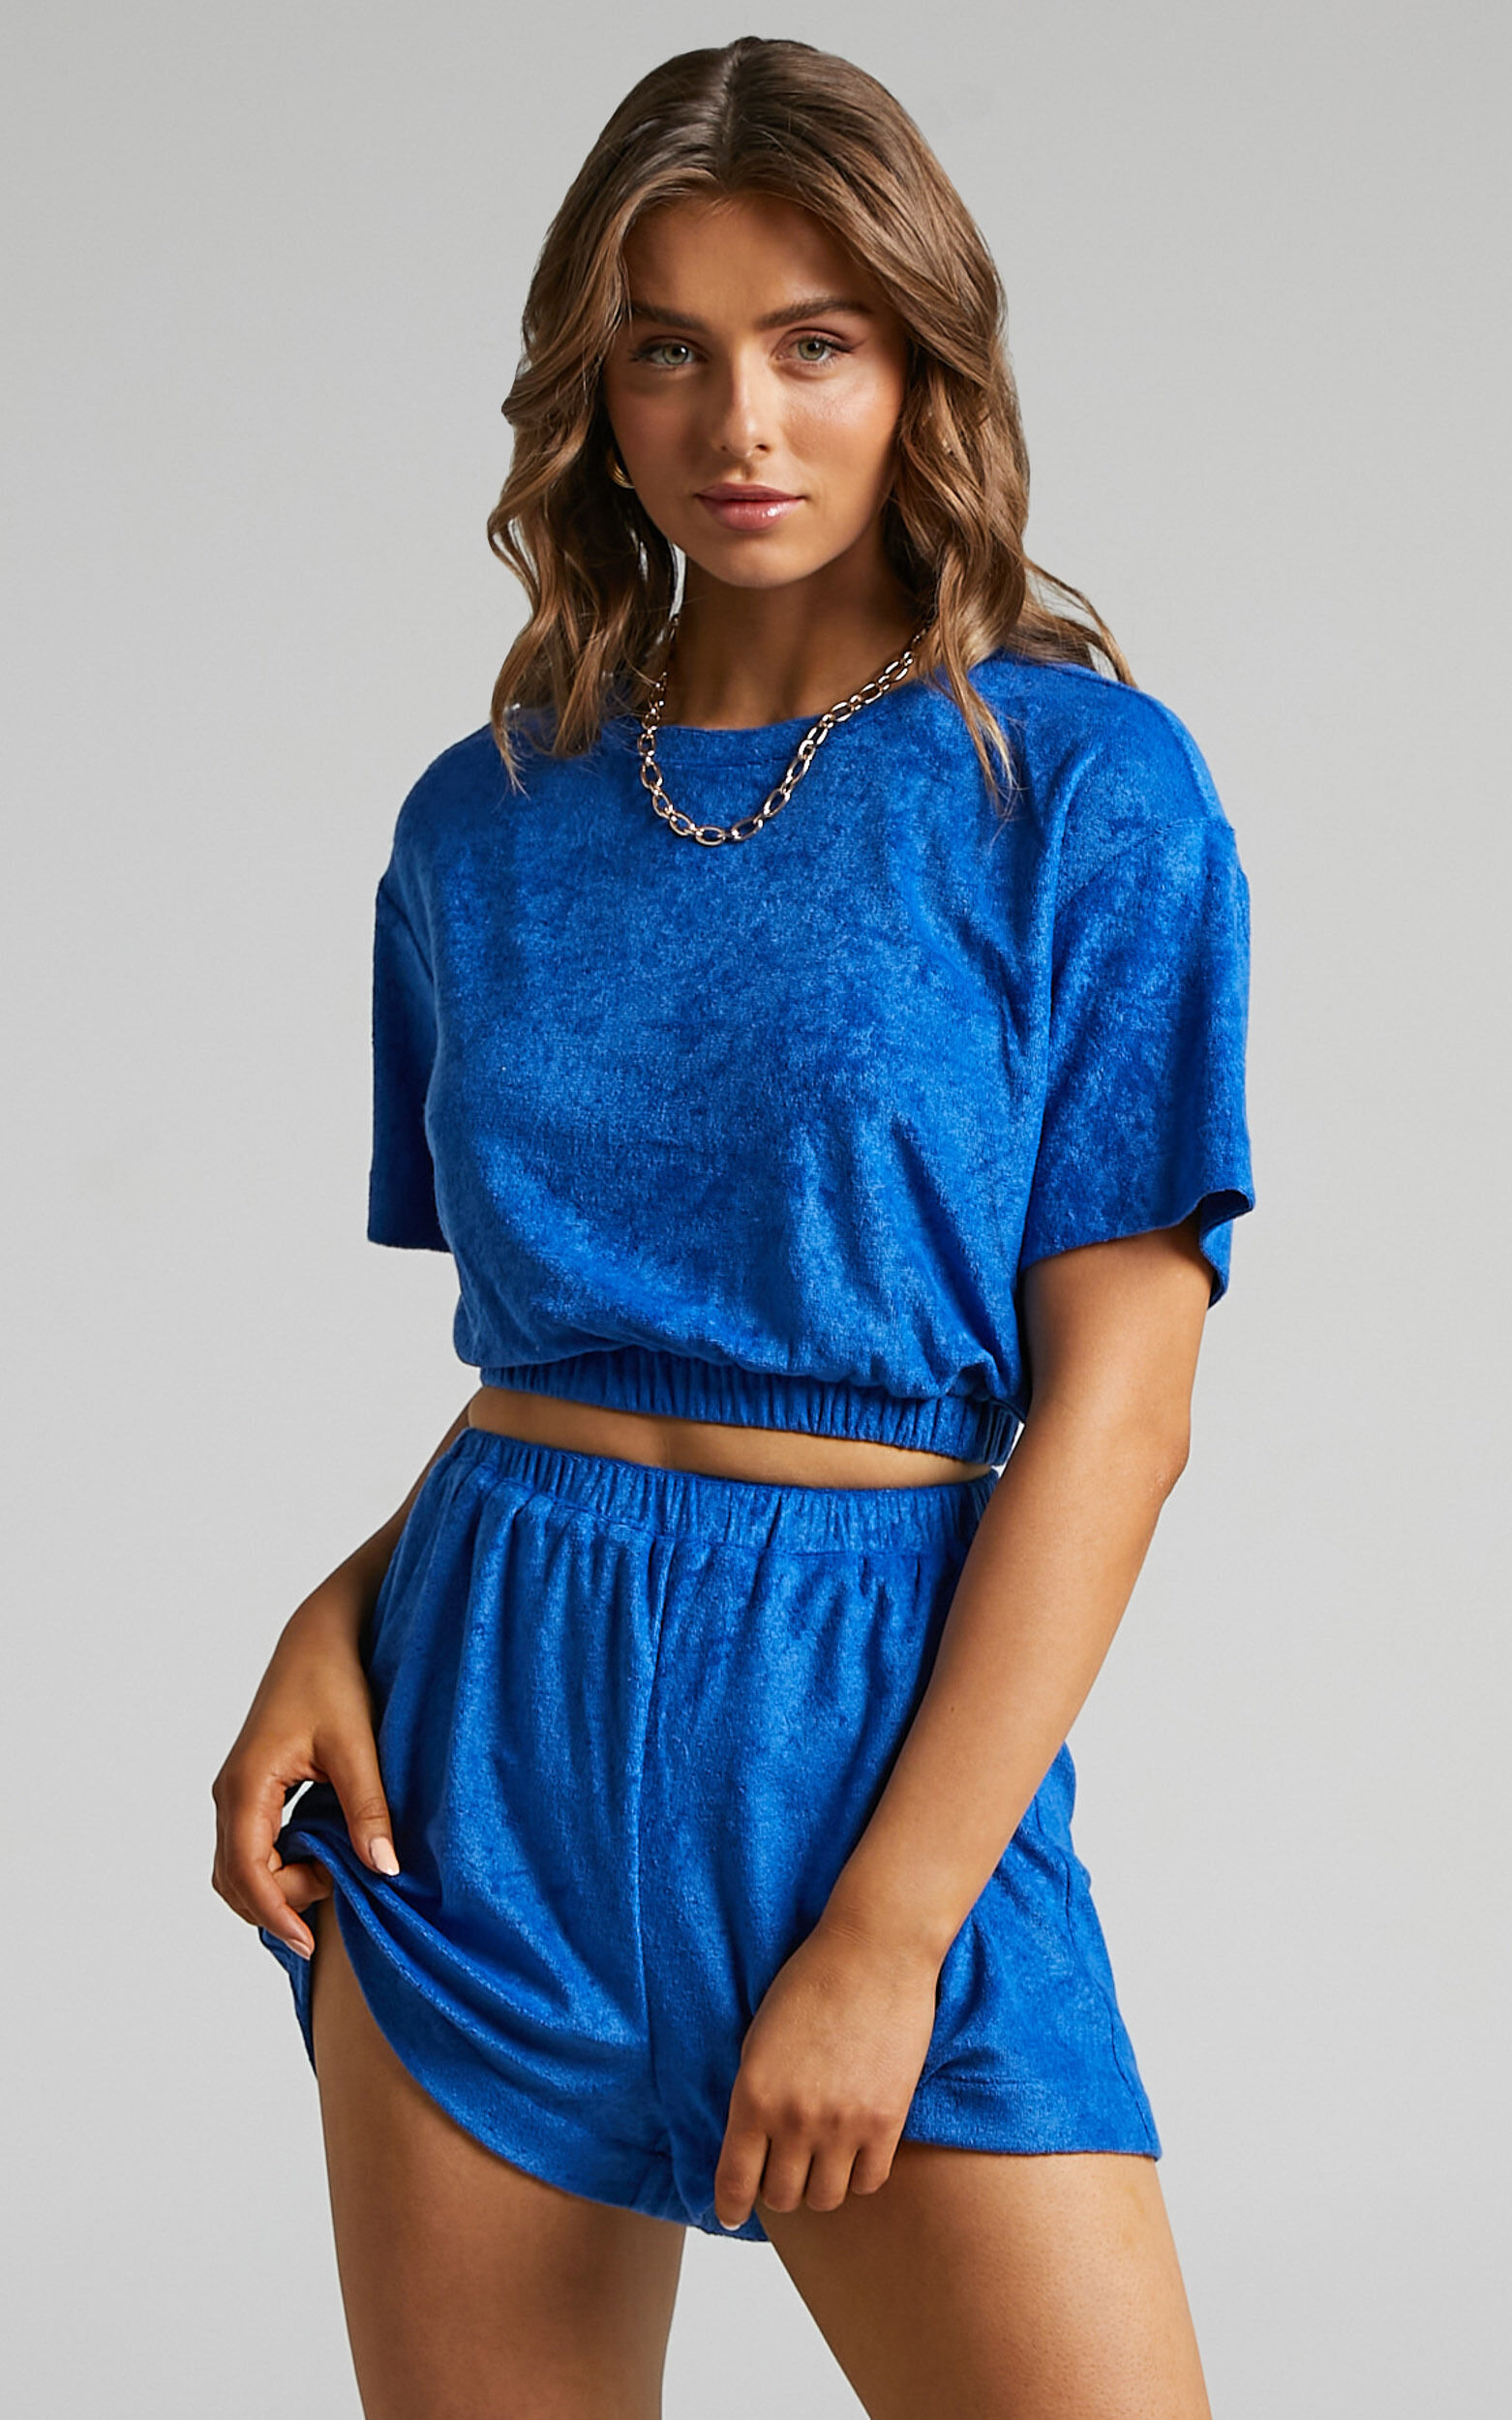 Broditha Terry Towelling Crew Neck Top in Blue - 04, BLU1, super-hi-res image number null